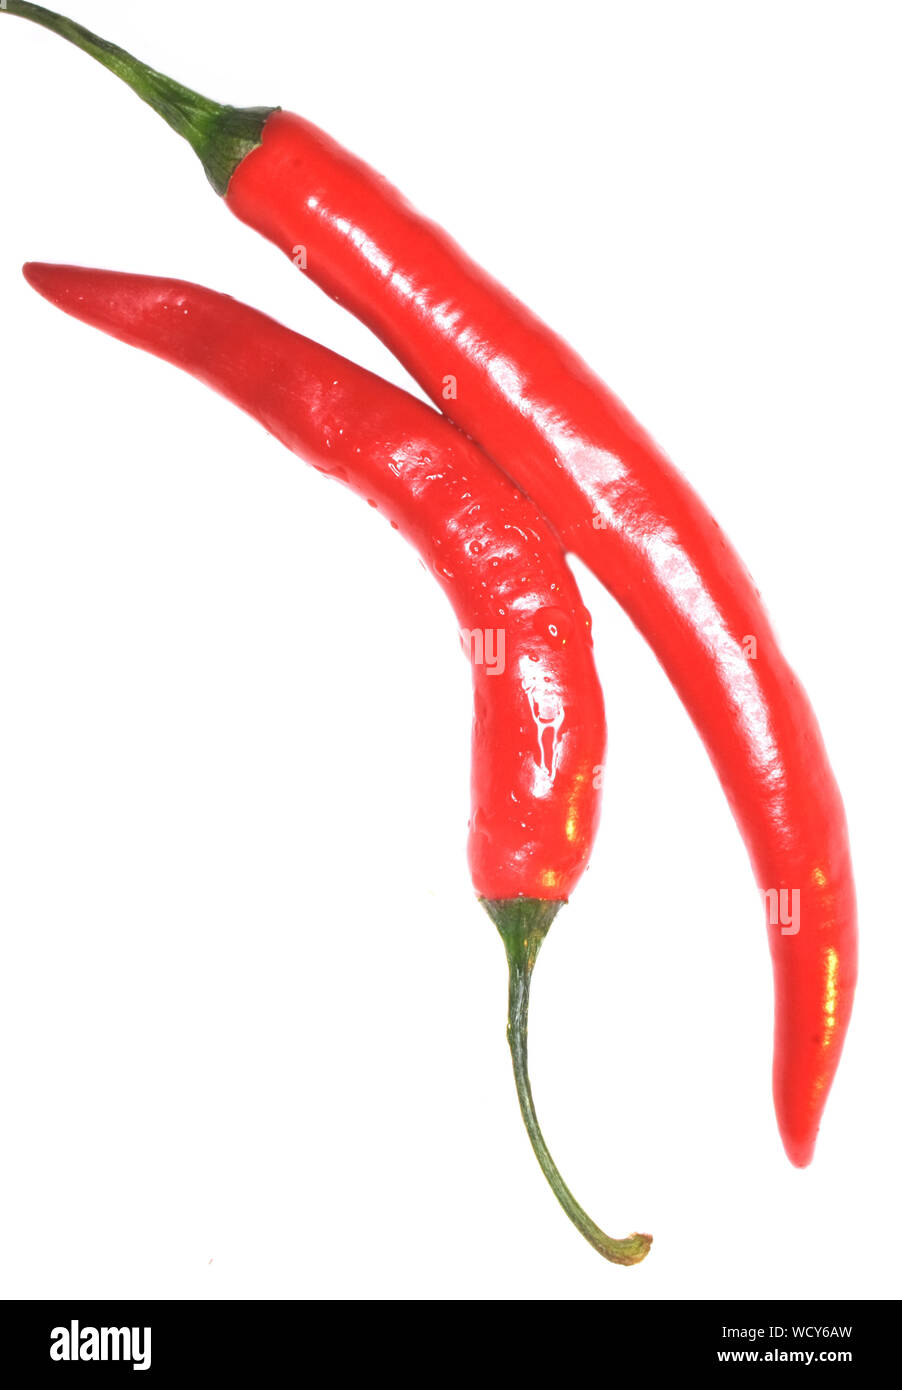 Close-up Of Chilies On White Background Stock Photo